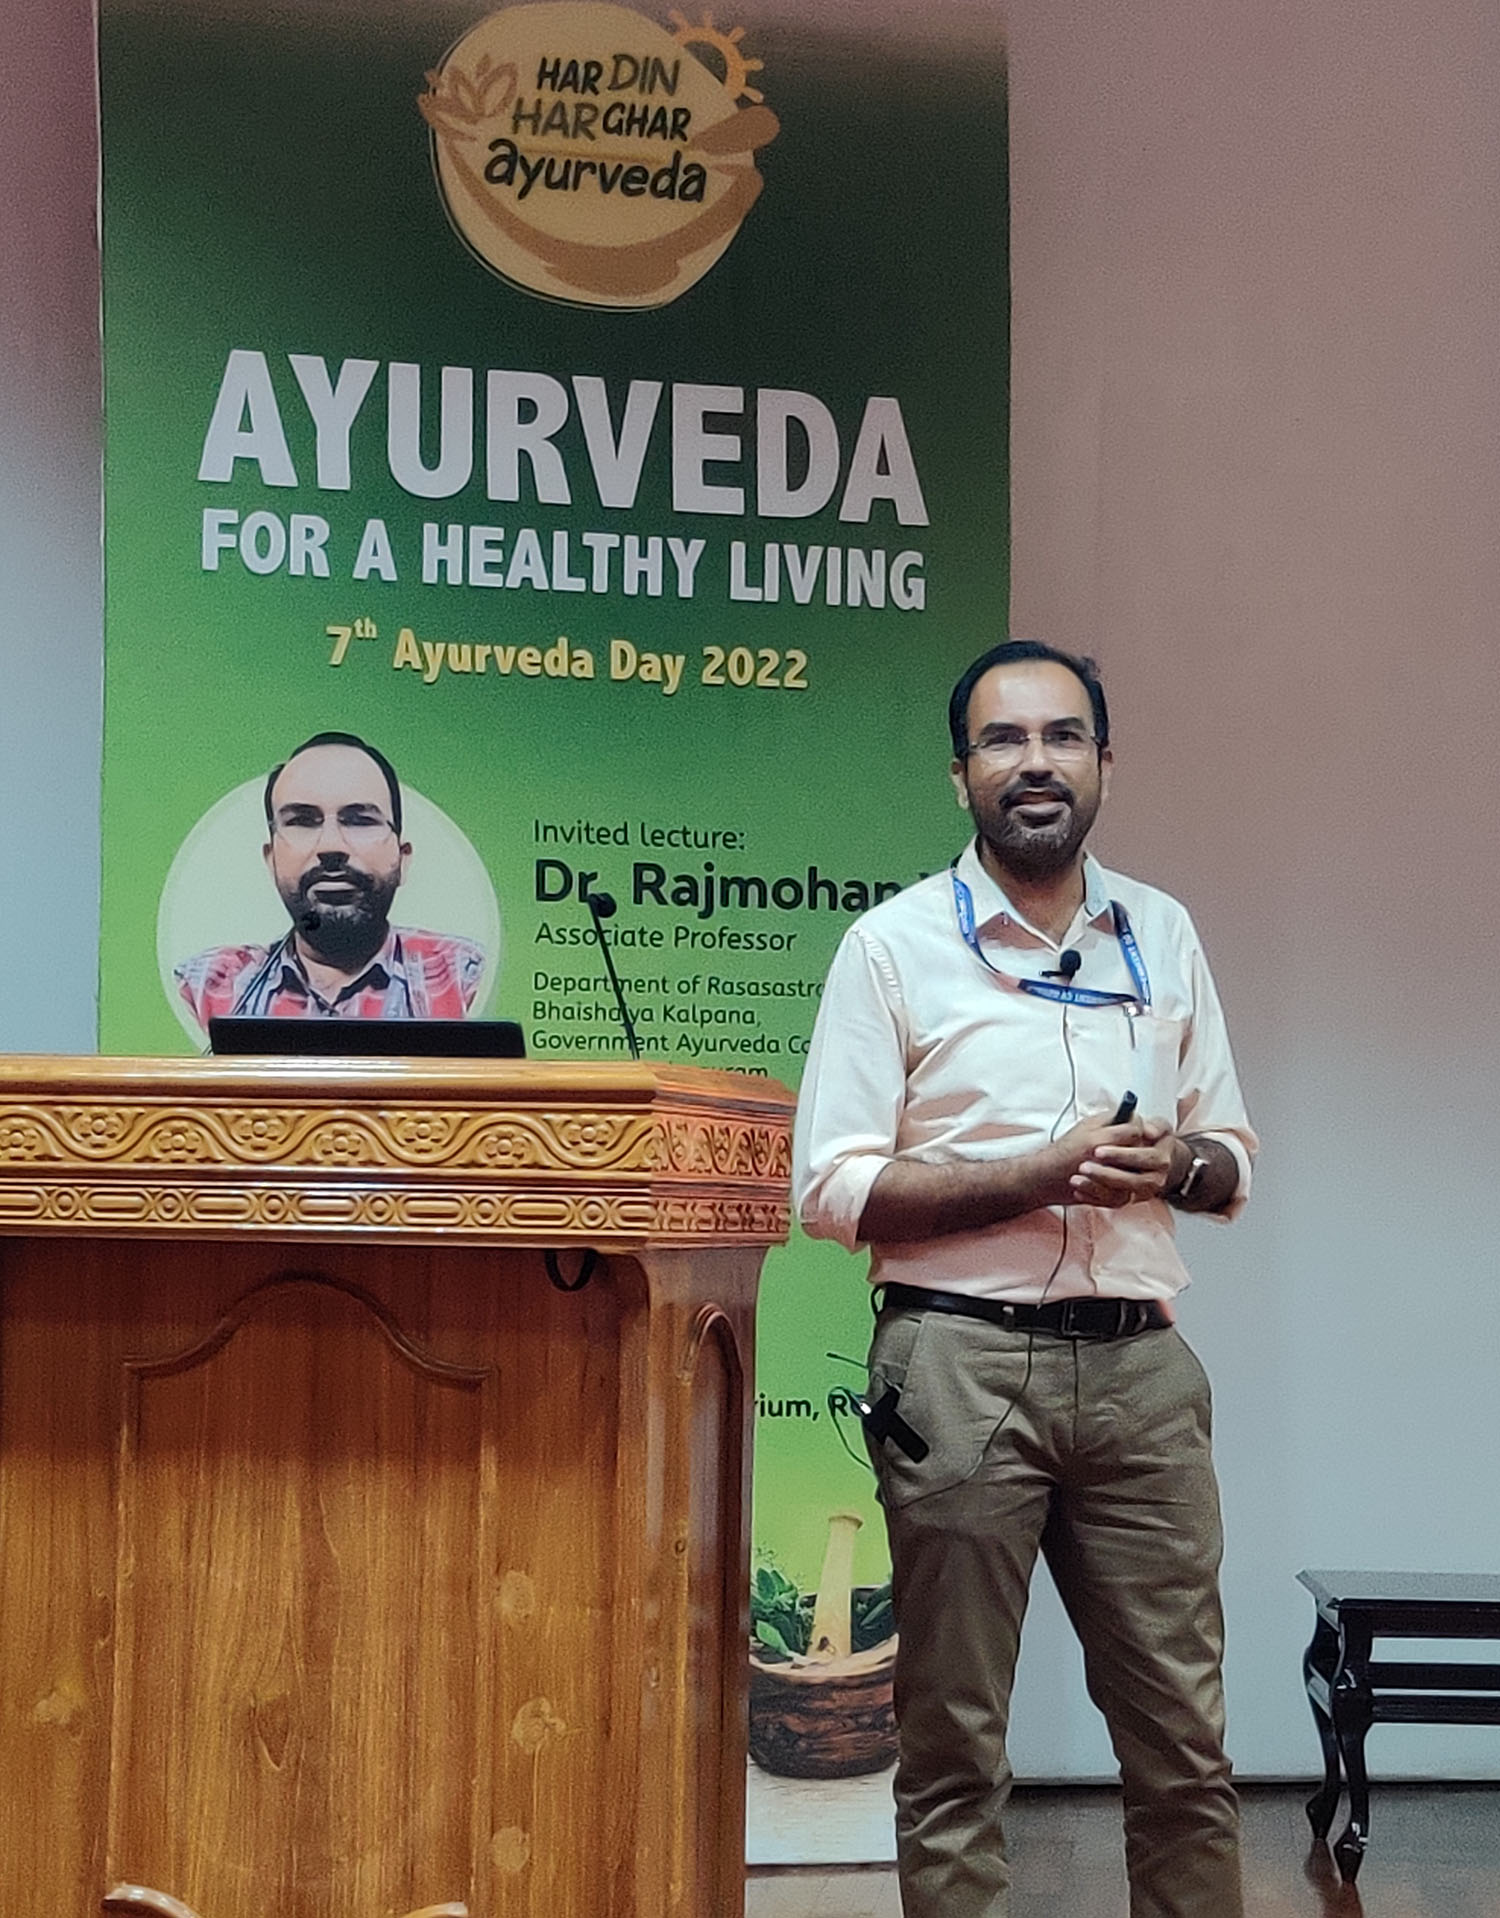 Research in Ayurveda has to be scaled up, says expert